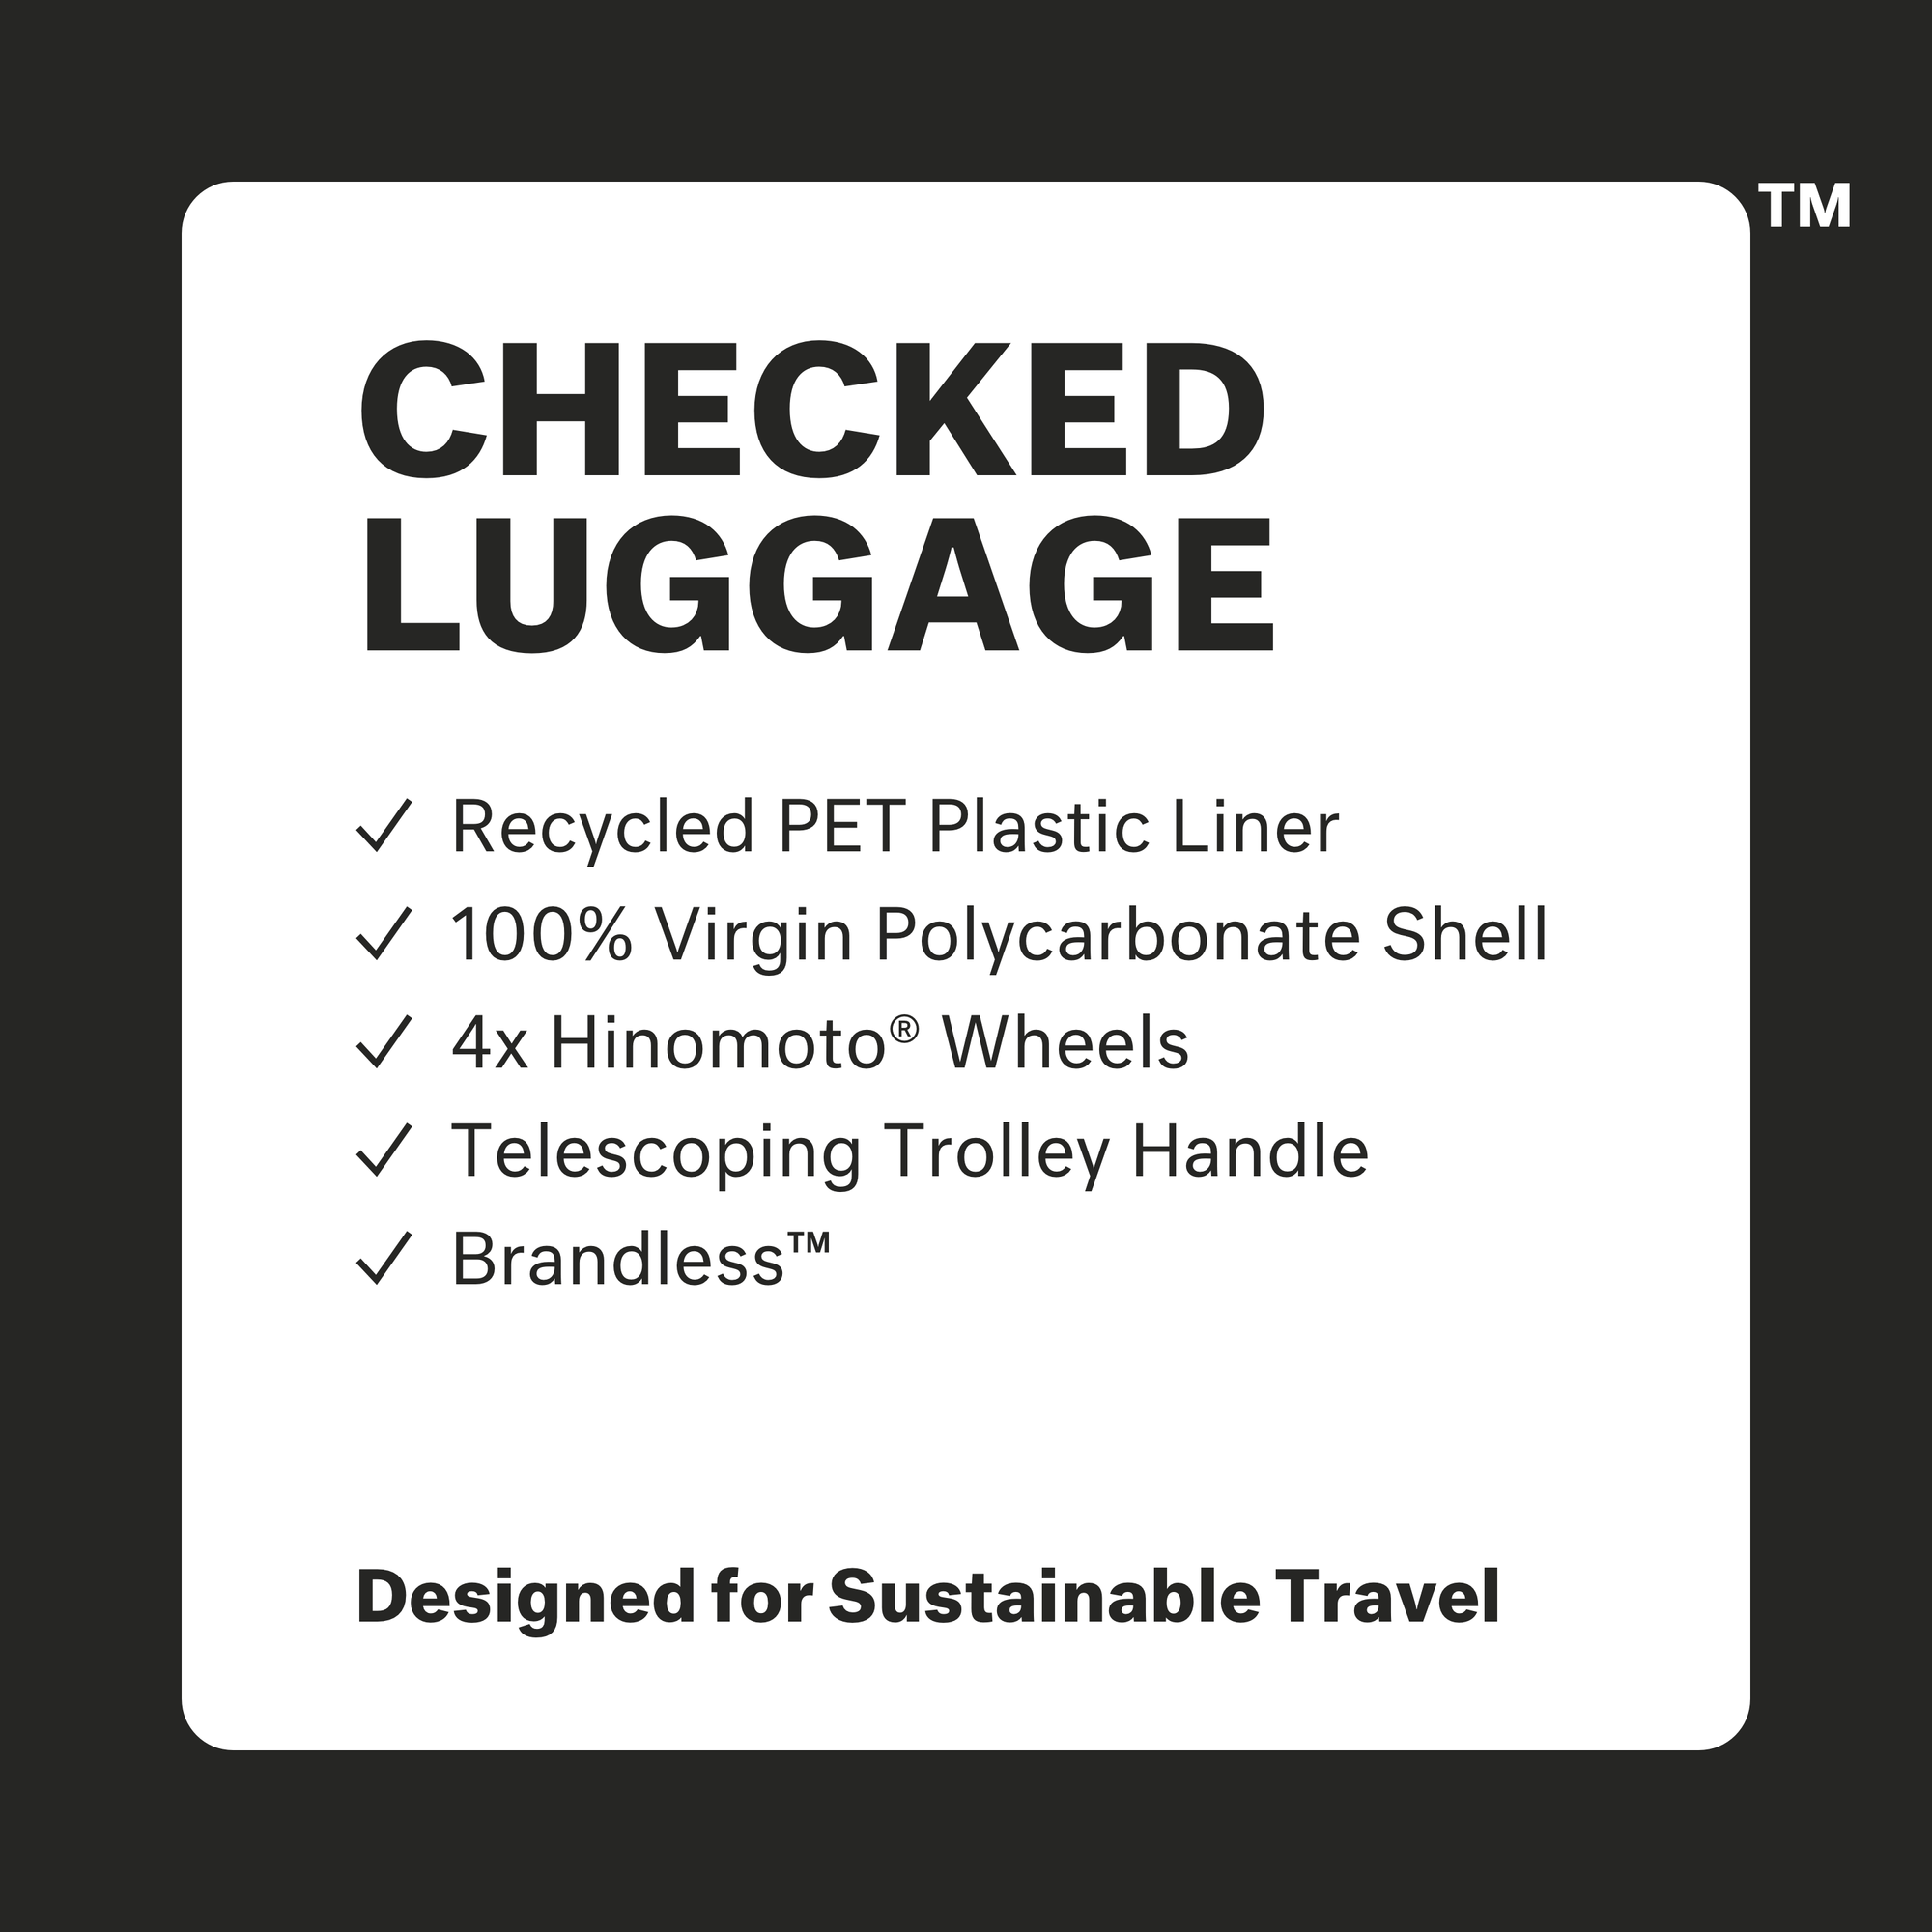 Photo, Brandless checked luggage front.